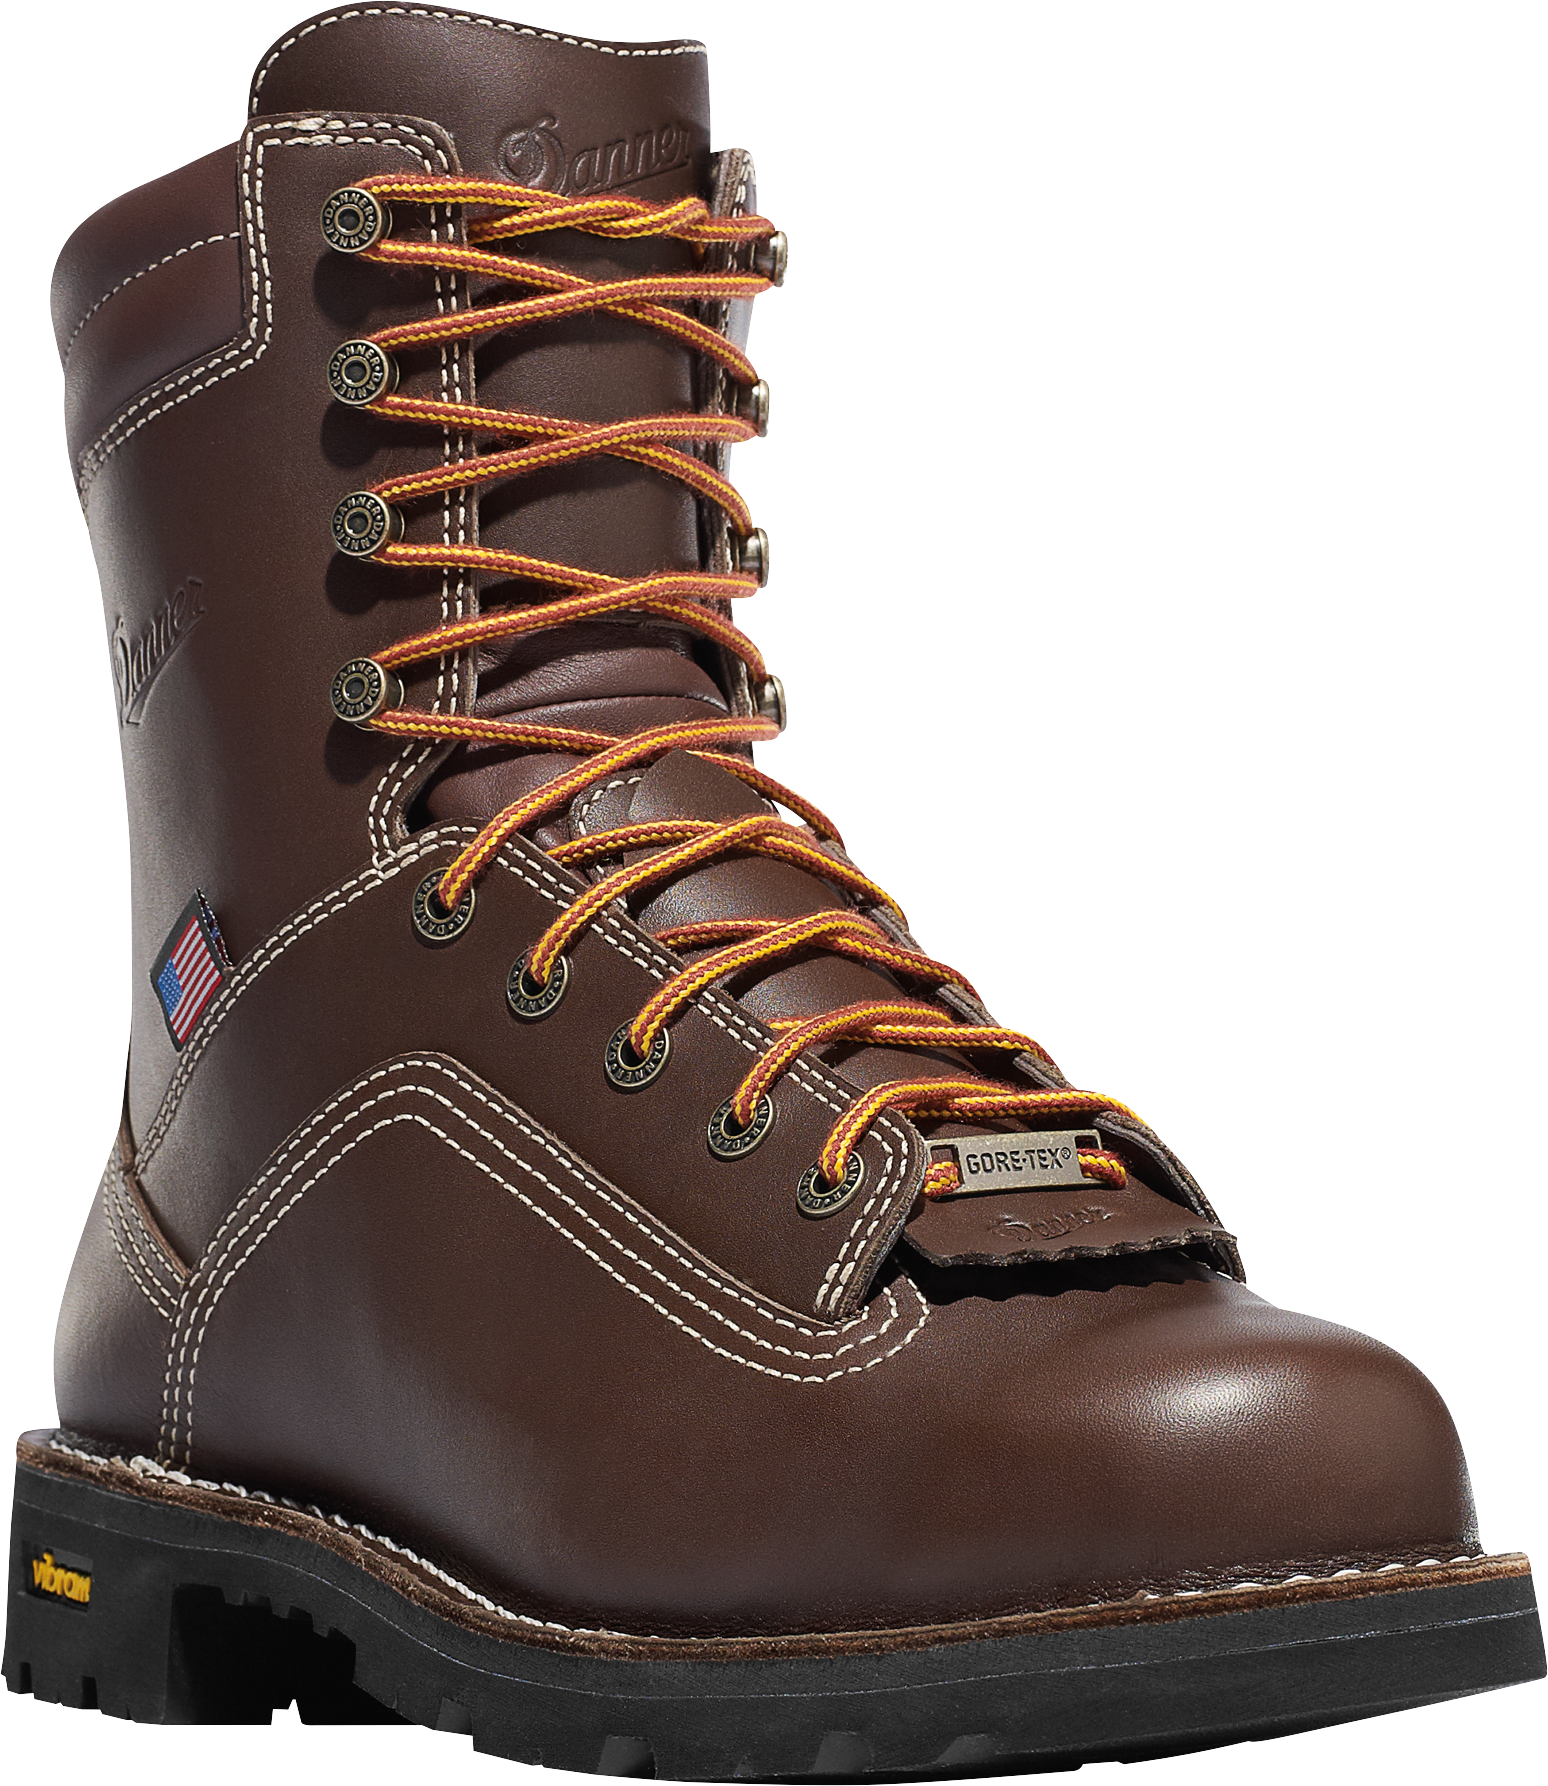 Danner Quarry USA Brown GORE-TEX Alloy Toe Work Boots for Men - Brown - 9.5W